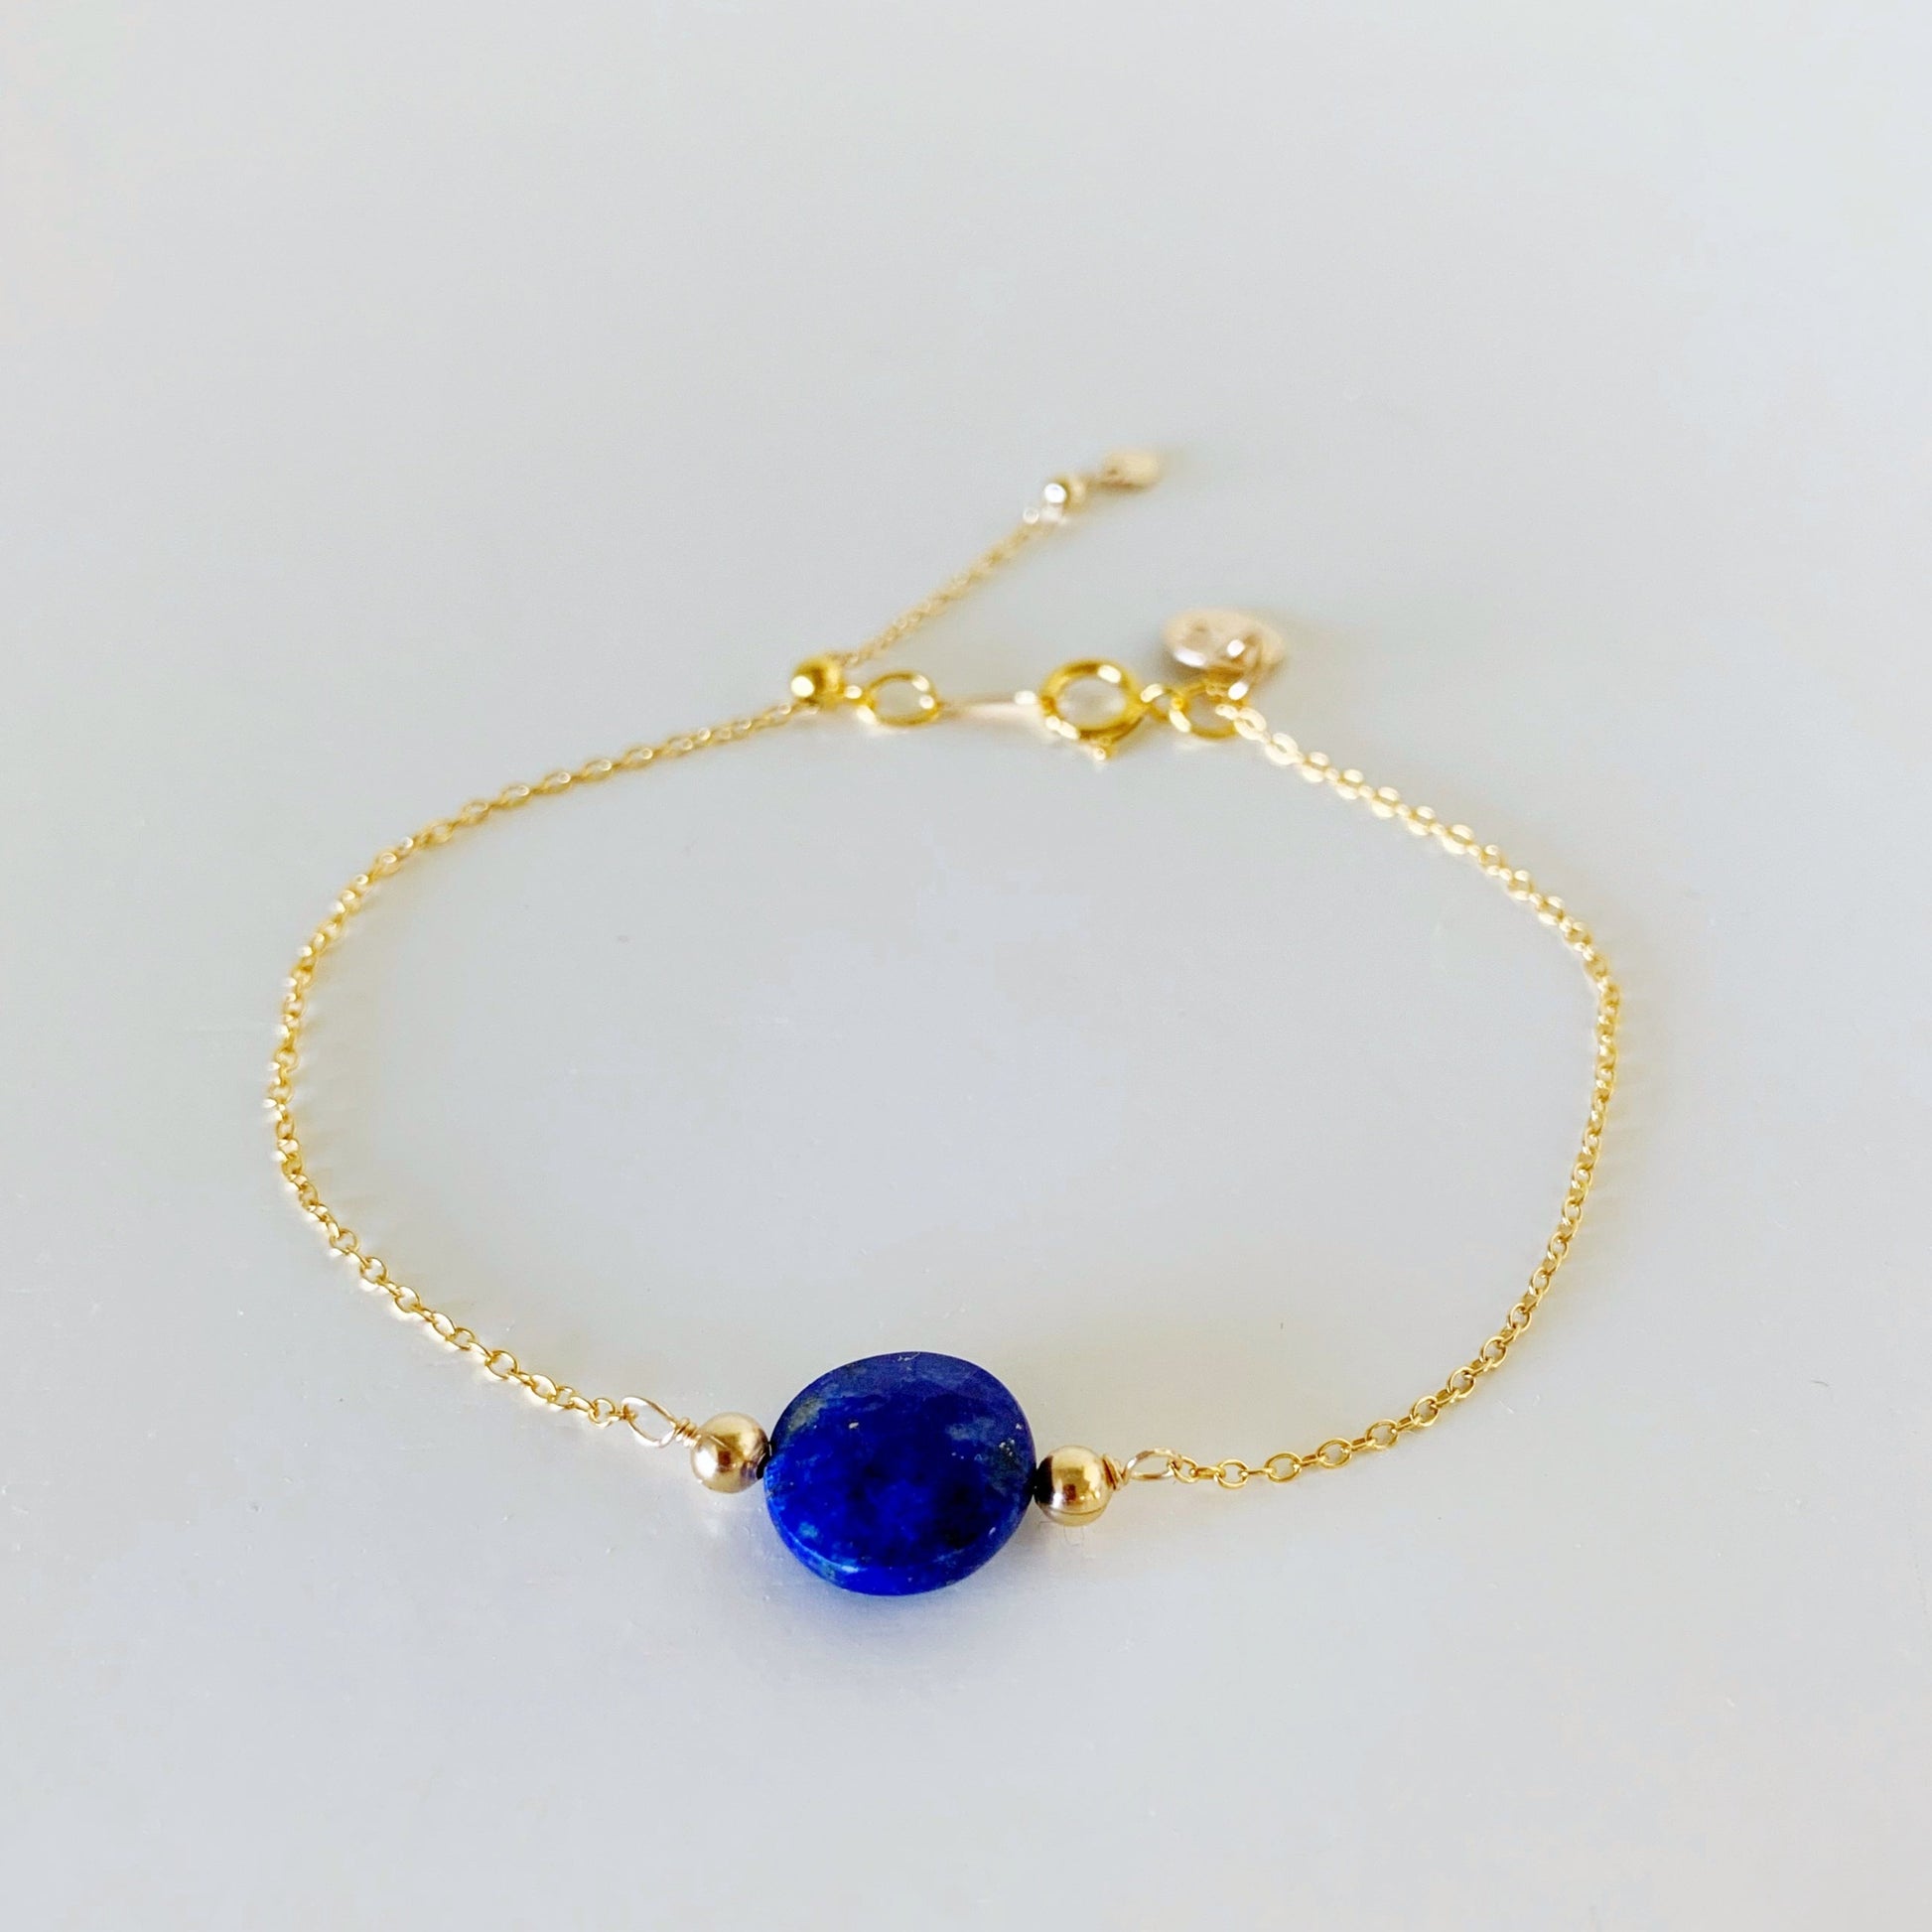 the neptune adjustable bracelet by mermaid and madeleines is a 14k gold filled chain based design with a slide bead at the clasp. there's also a royal blue lapis faceted coin bead at the center. this piece is photographed from the front on a white surface